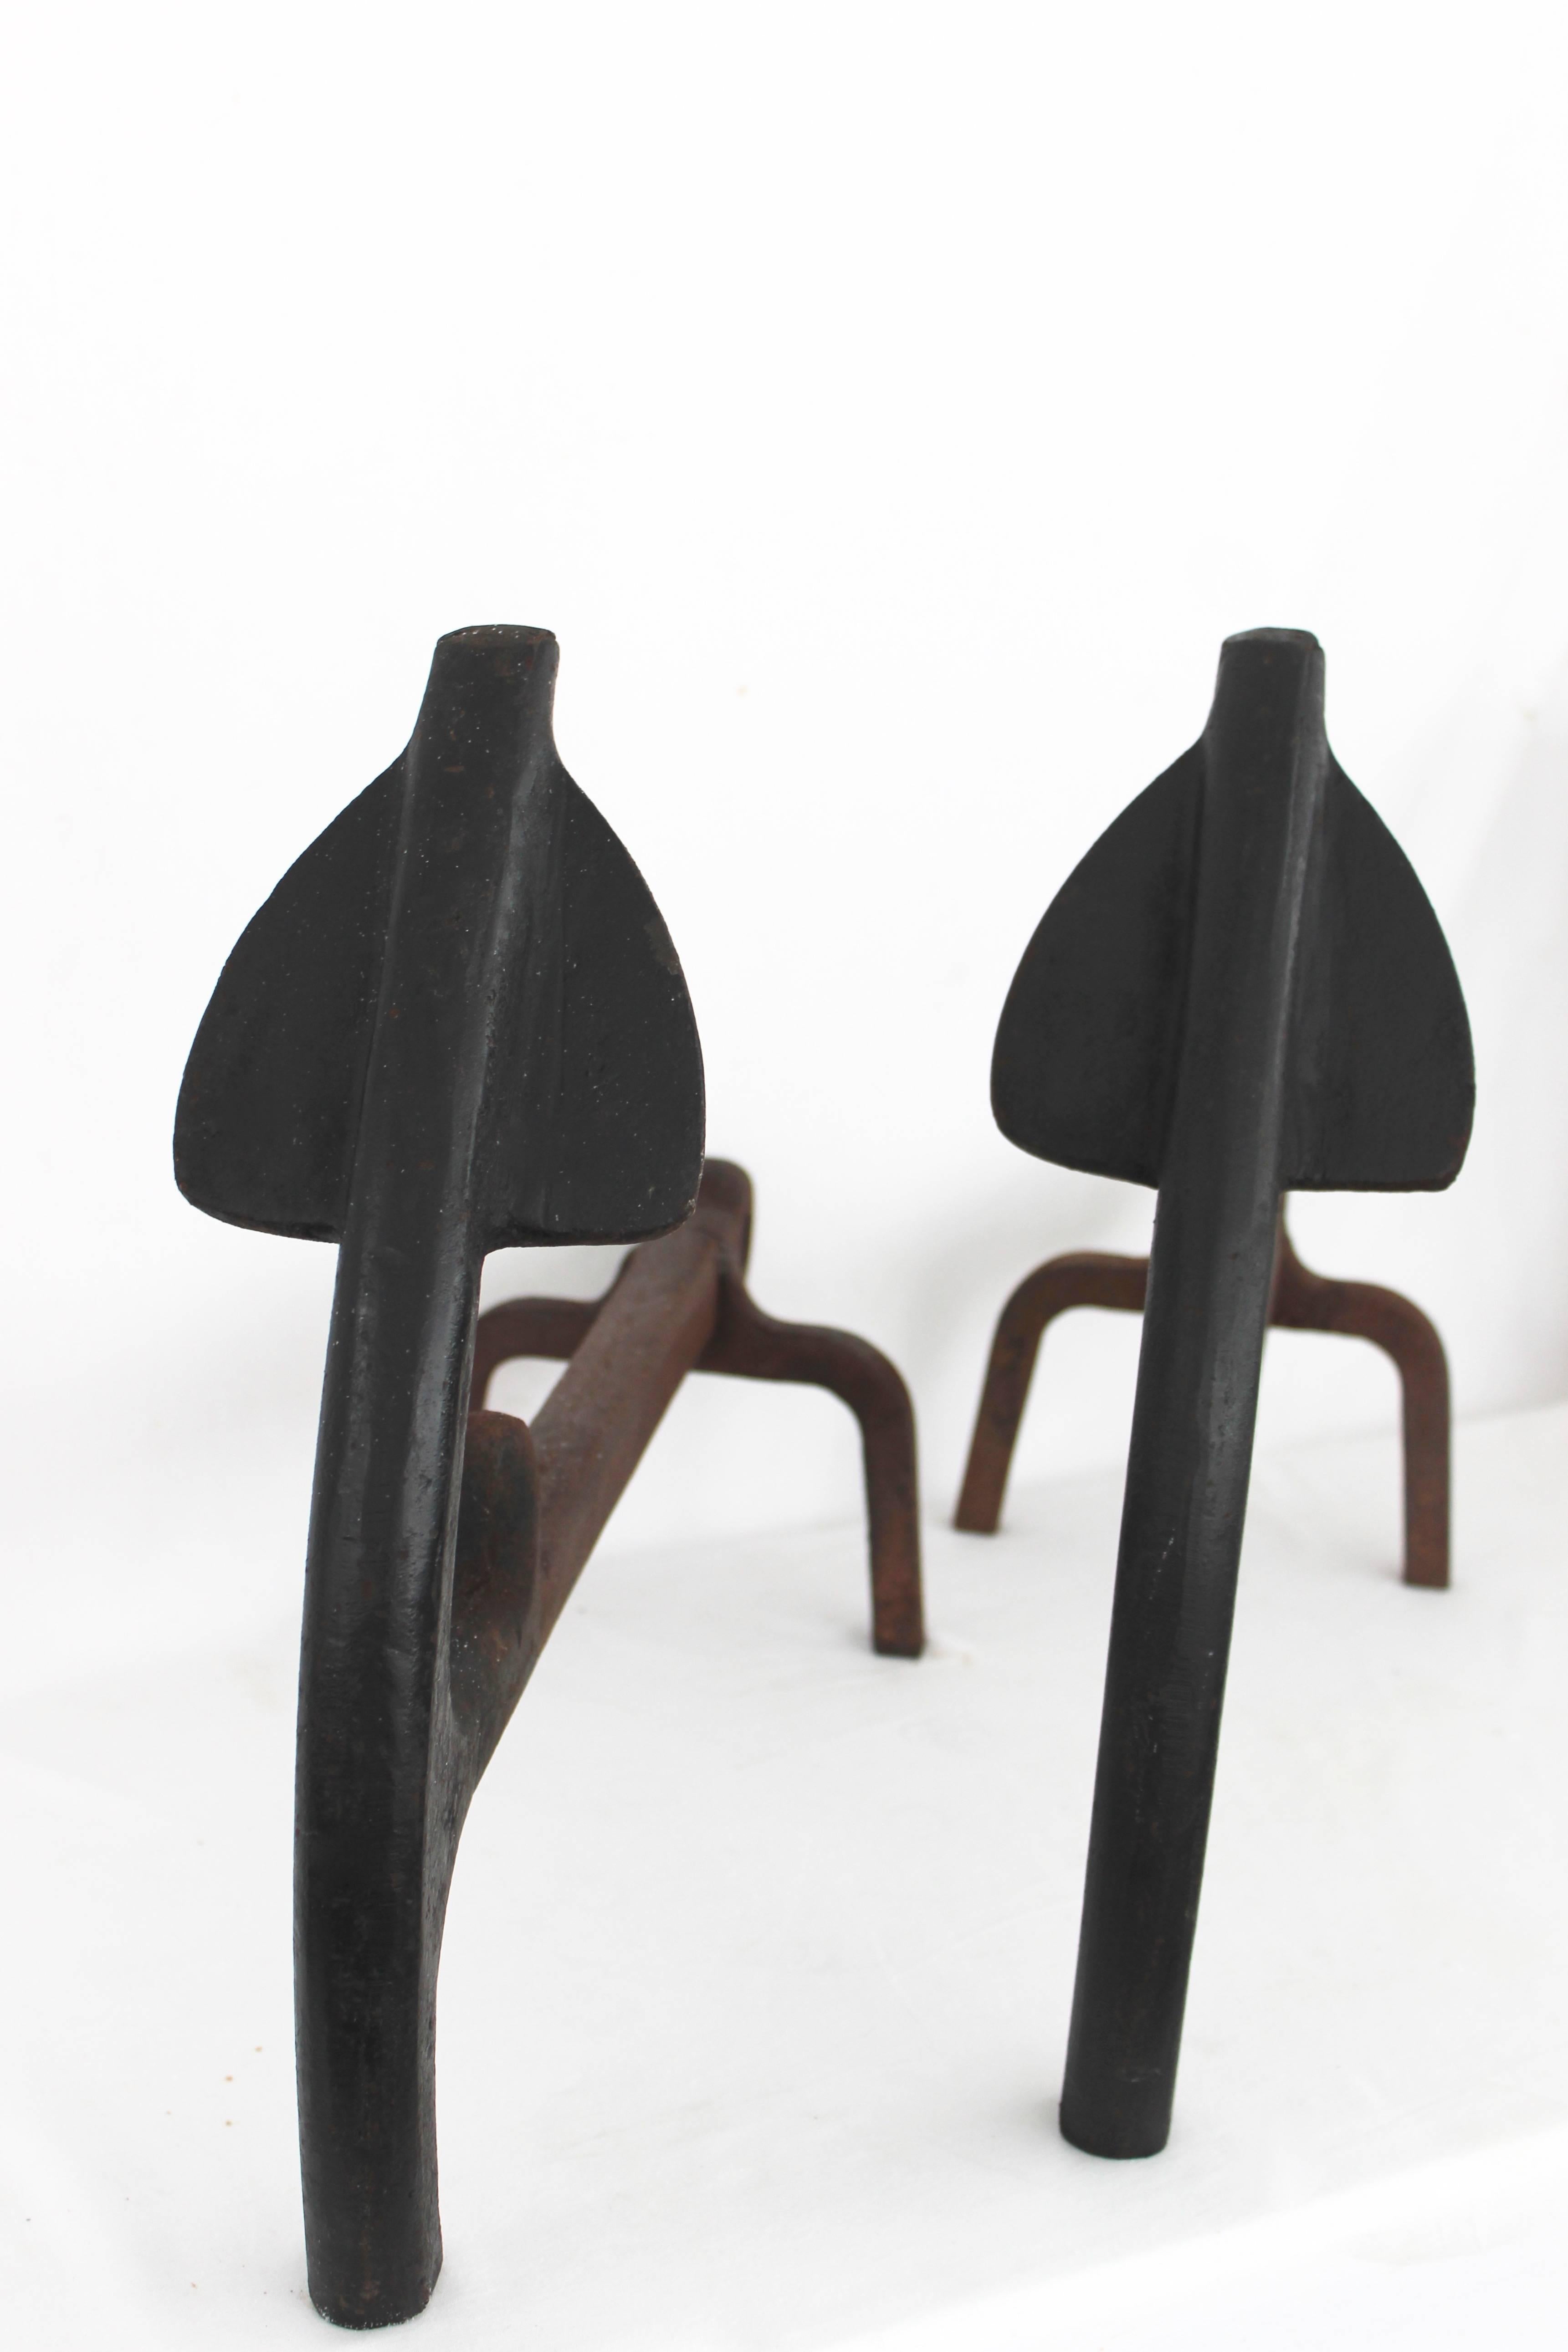 Pair of wrought iron anchor andirons/ log holders.